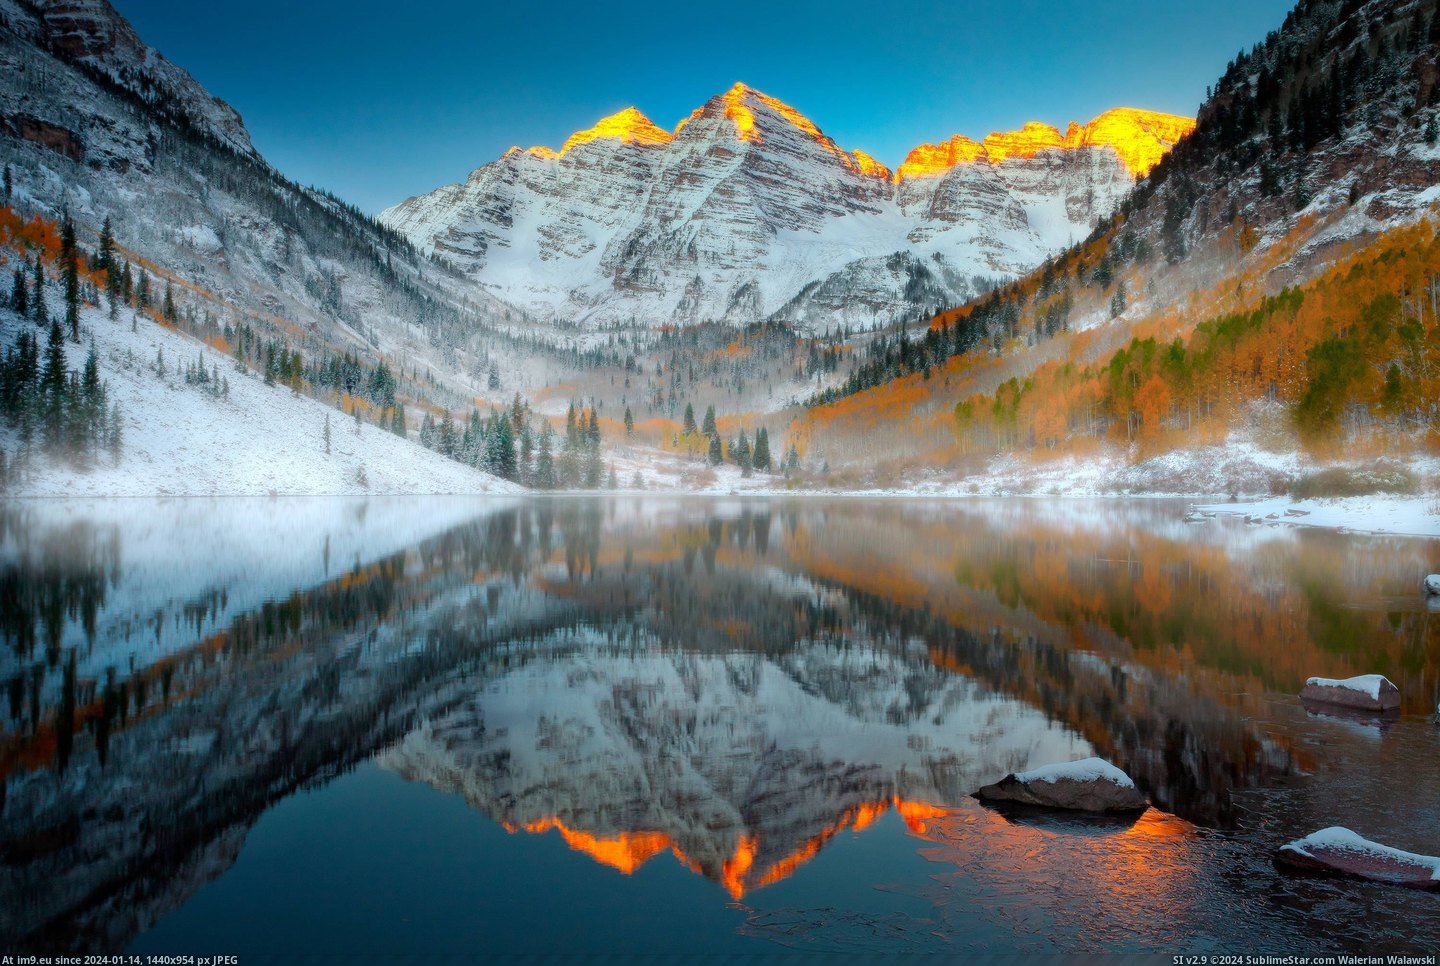 #Winter #Colorado #Sunrise #Aspen #Maroon #Mcneal #Wilderness #Kevin #Bells [Earthporn] Maroon Bells Sunrise In Winter - Maroon Bells Wilderness, Aspen, Colorado [3,000x2000] by Kevin McNeal Pic. (Obraz z album My r/EARTHPORN favs))